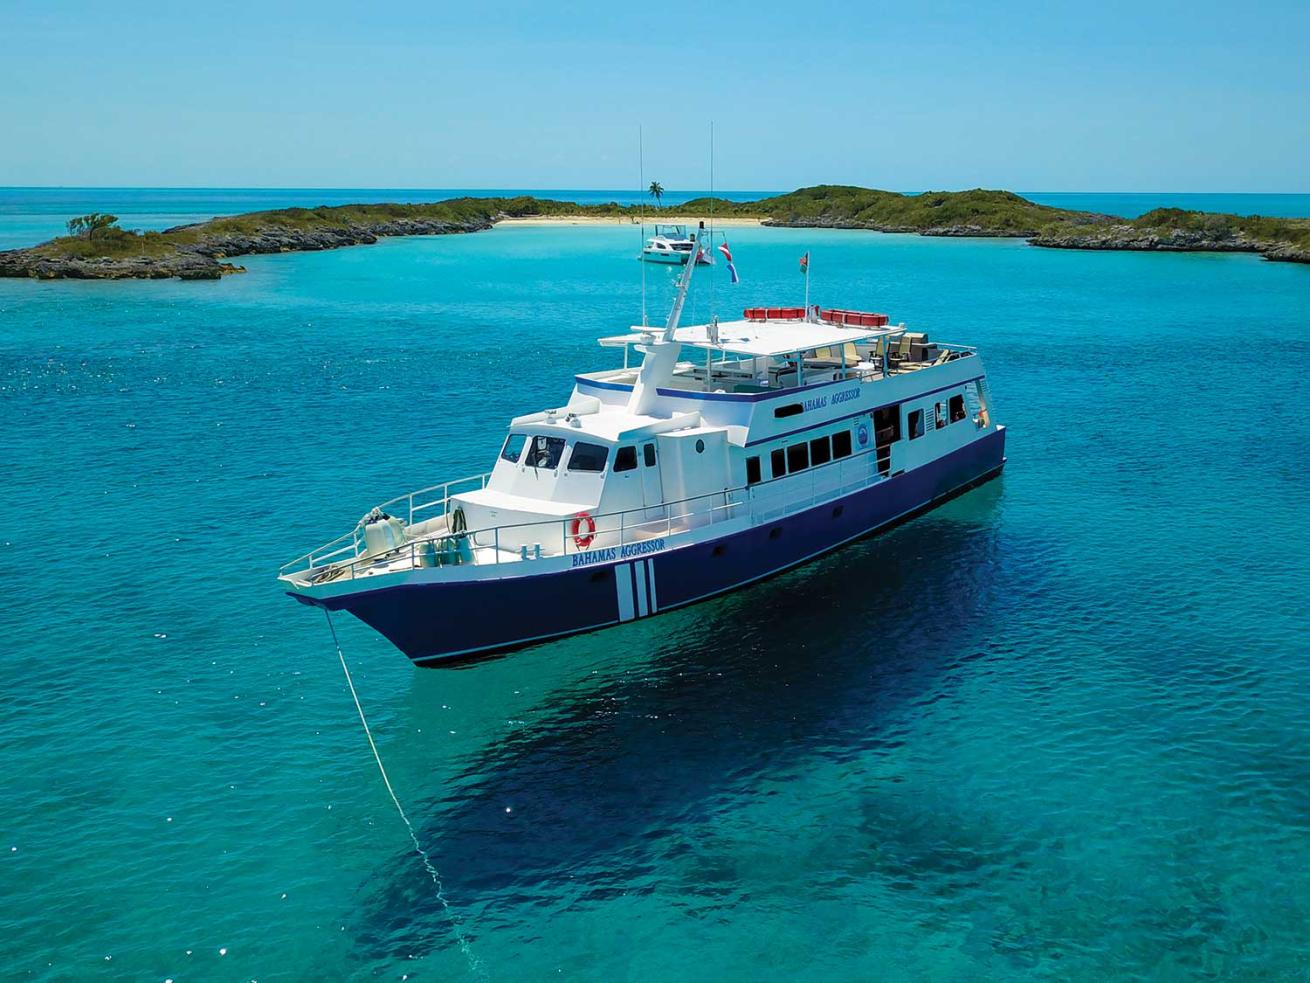 The 100-foot Bahamas Aggressor offers diving off the back deck.